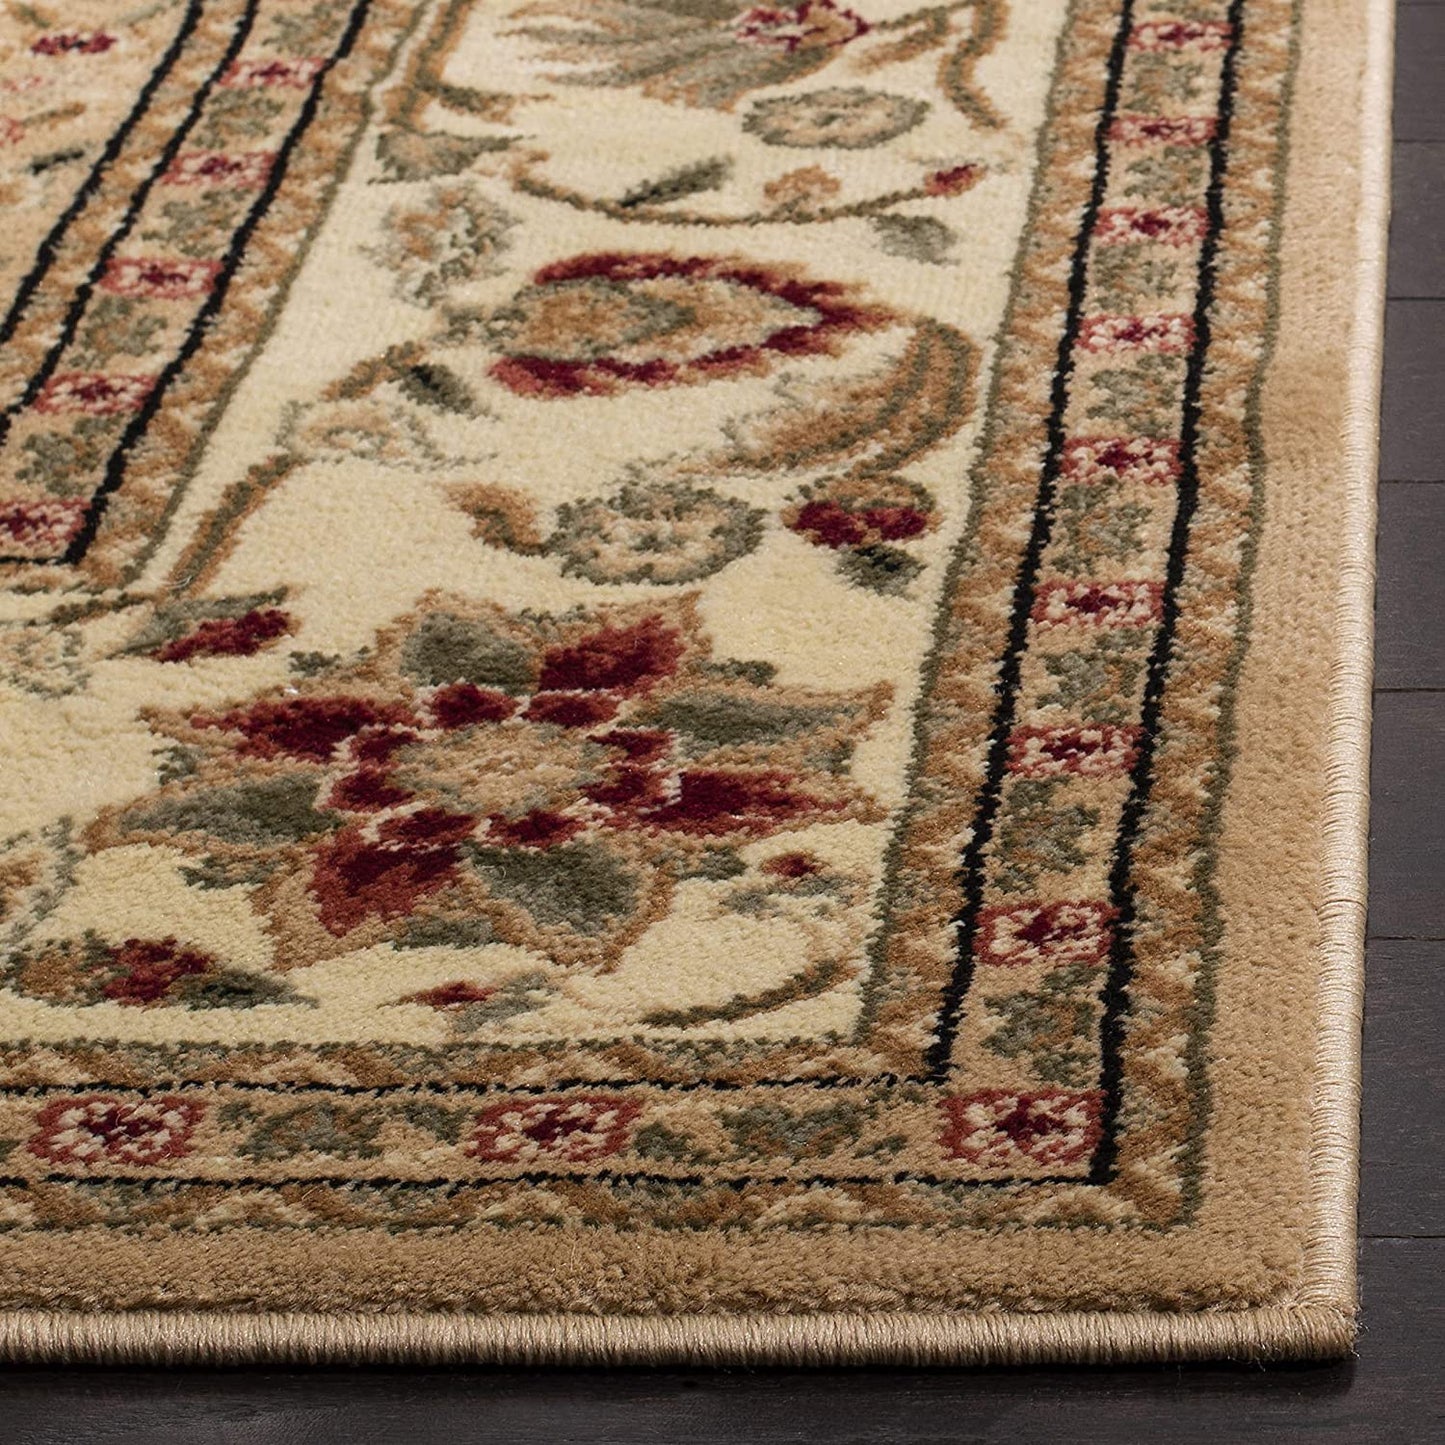 Lyndhurst CollectionTraditional Oriental Non-Shedding Stain Resistant Living Room Bedroom Accent Rug Beige / Ivory